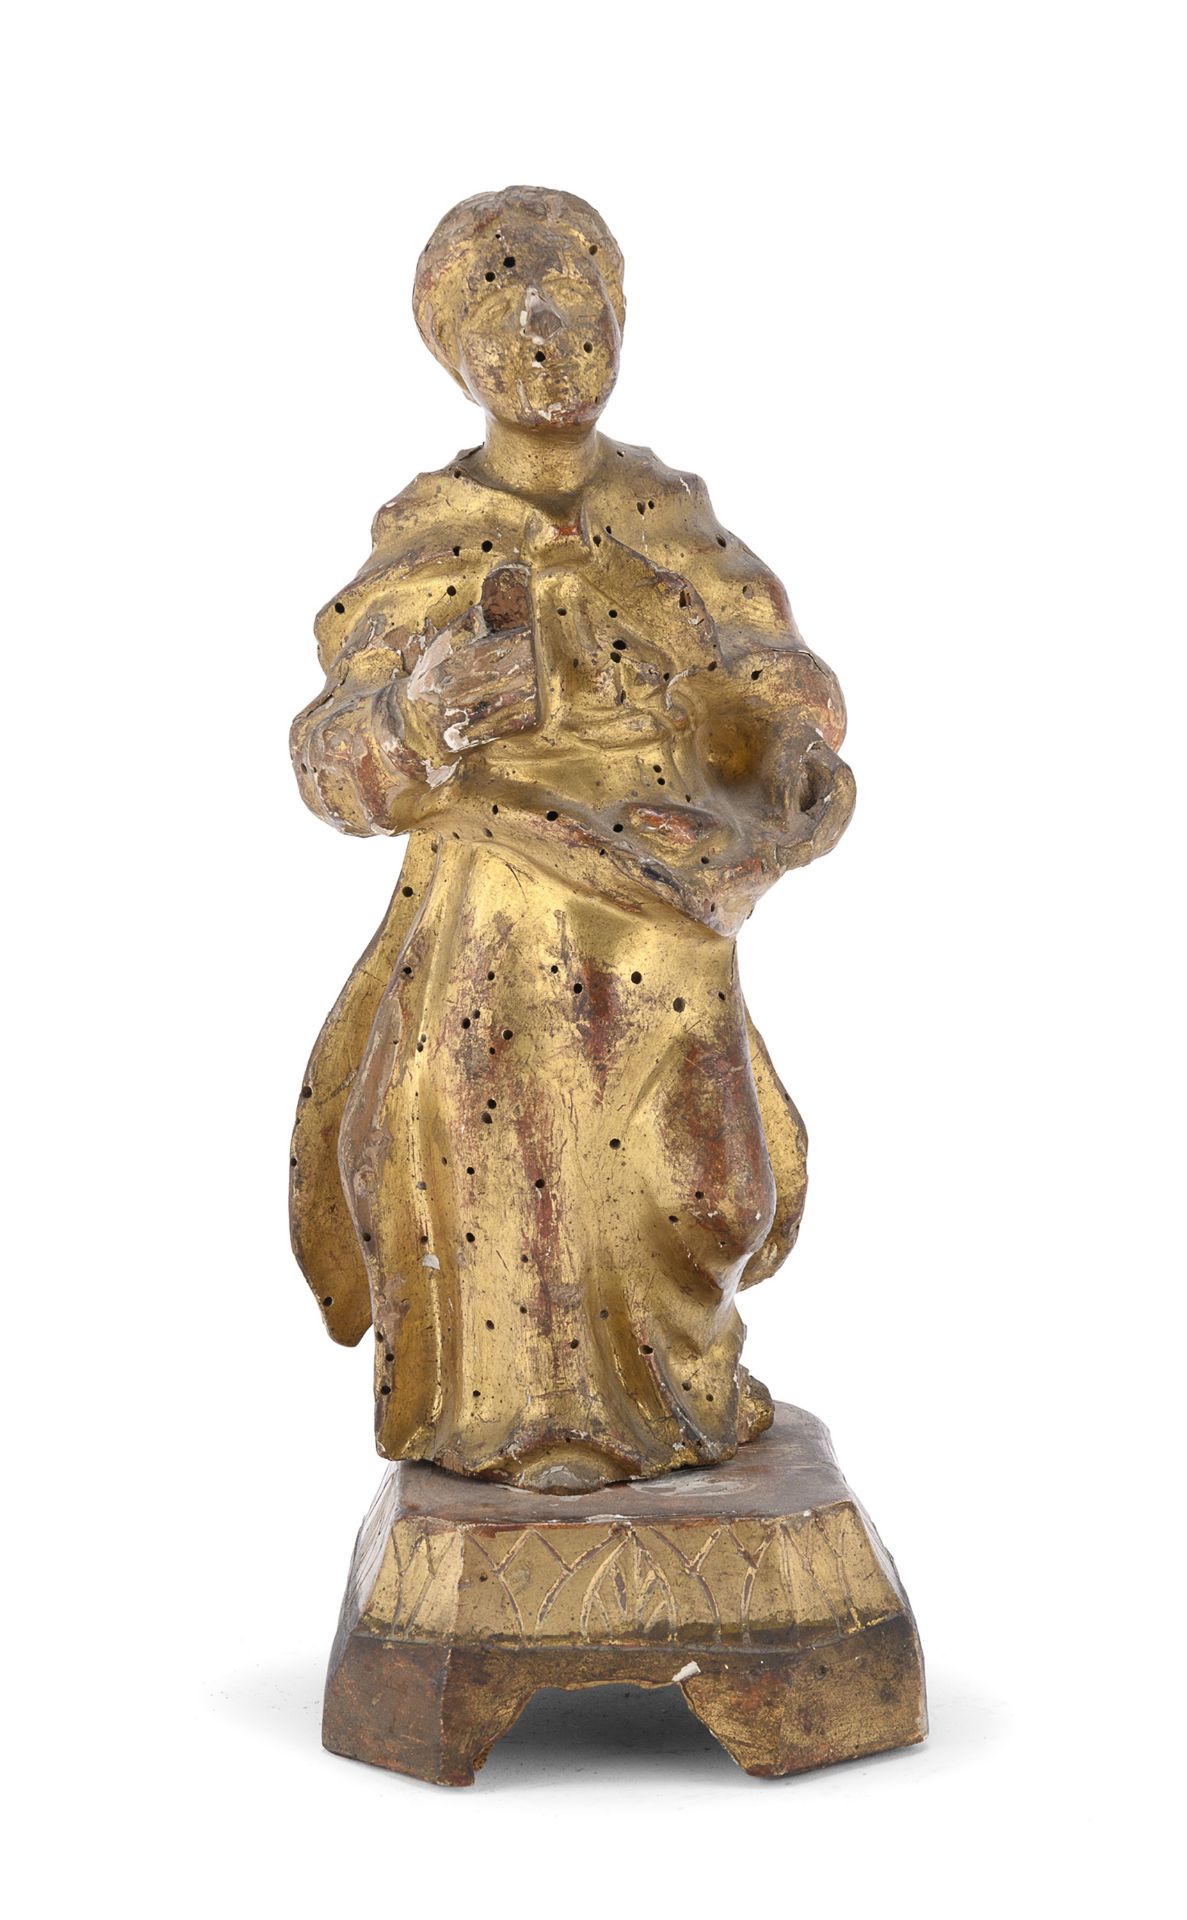 WOOD SCULPTURE OF A SAINT PROBABLY NAPLES 18TH CENTURY